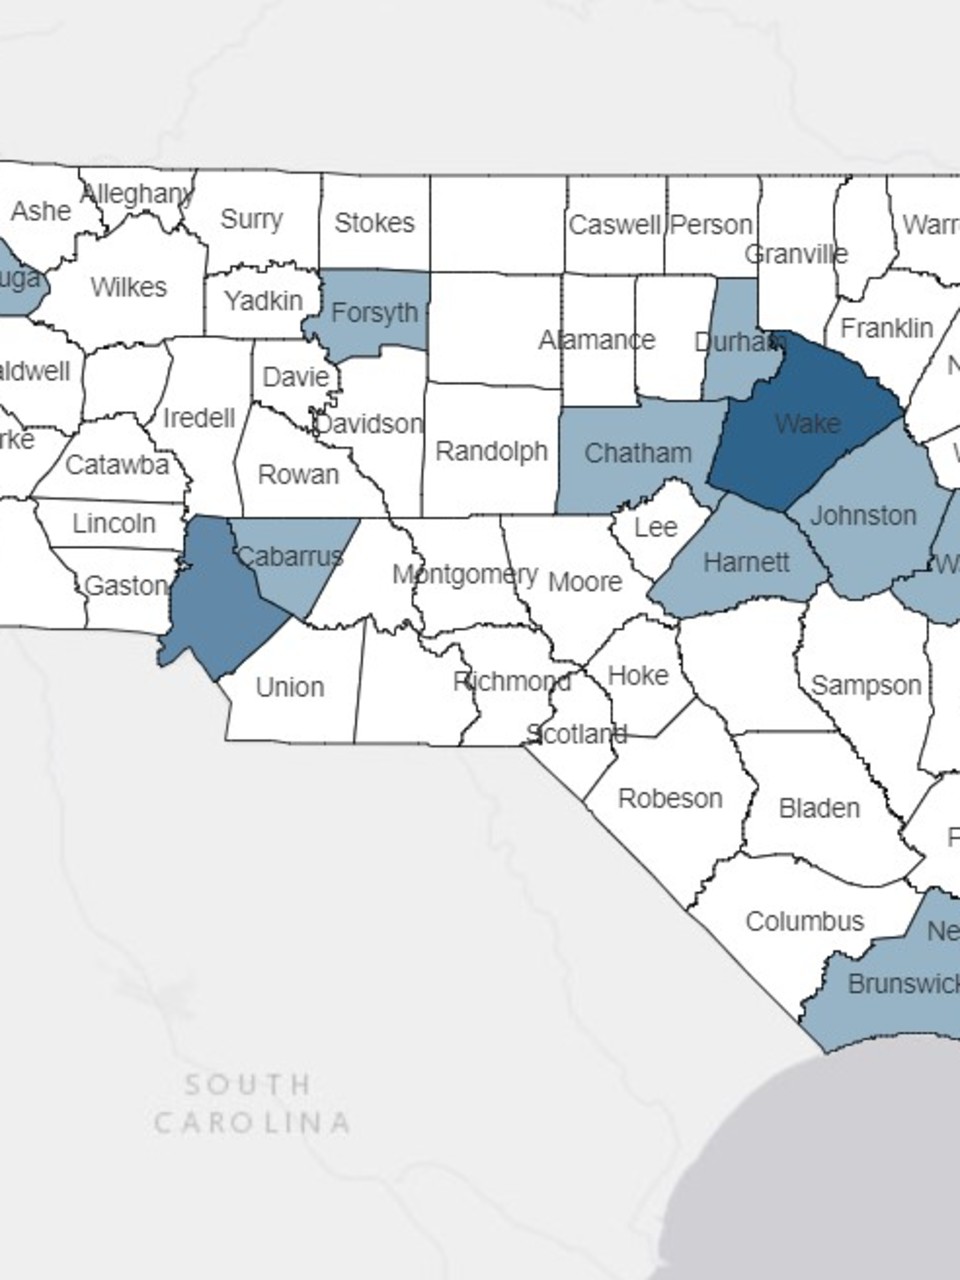 Nc Coronavirus Cases Up To 32 Including Cases In Craven Onslow